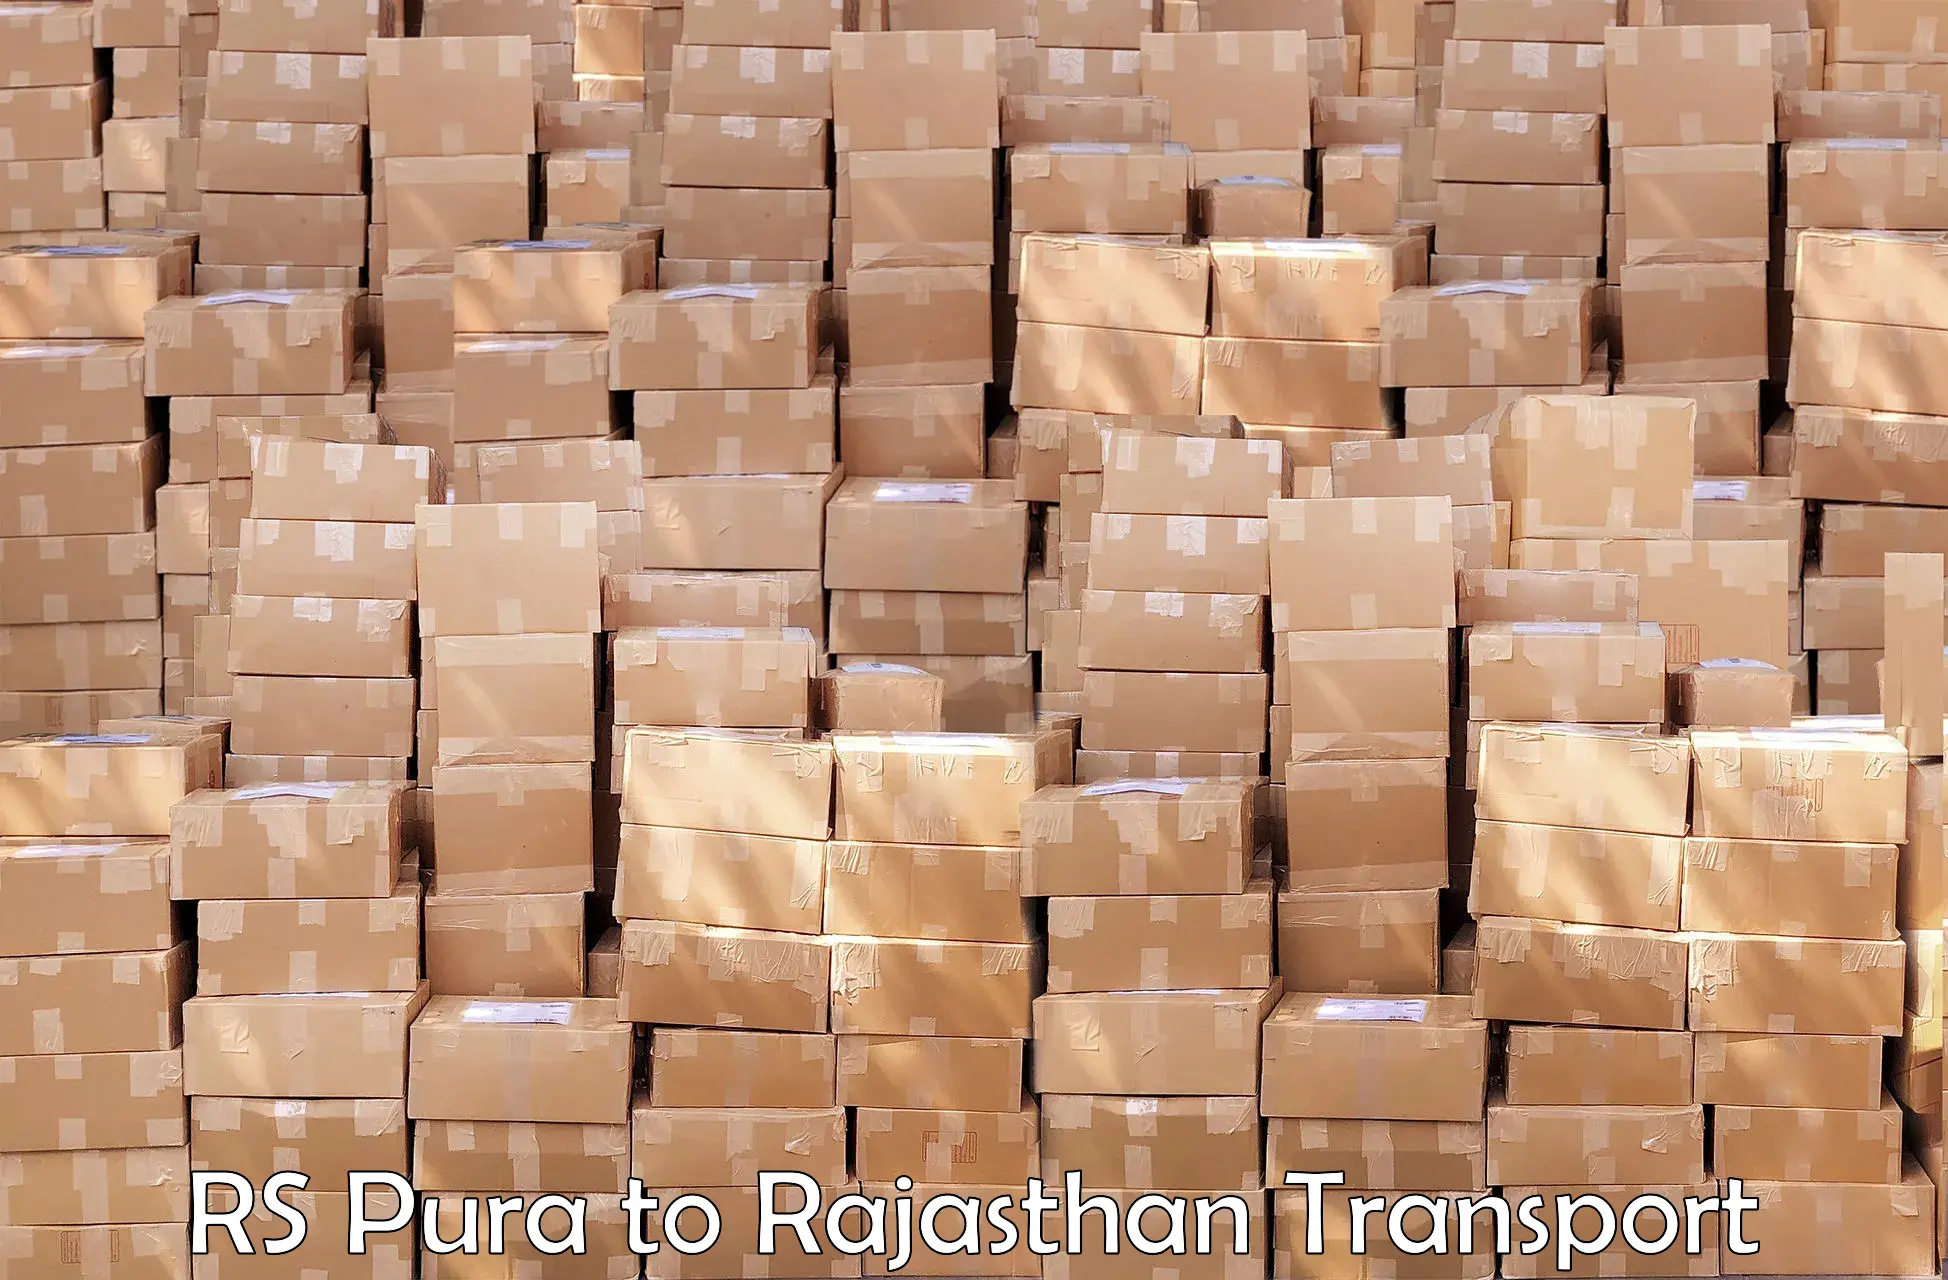 Road transport online services RS Pura to Kaman